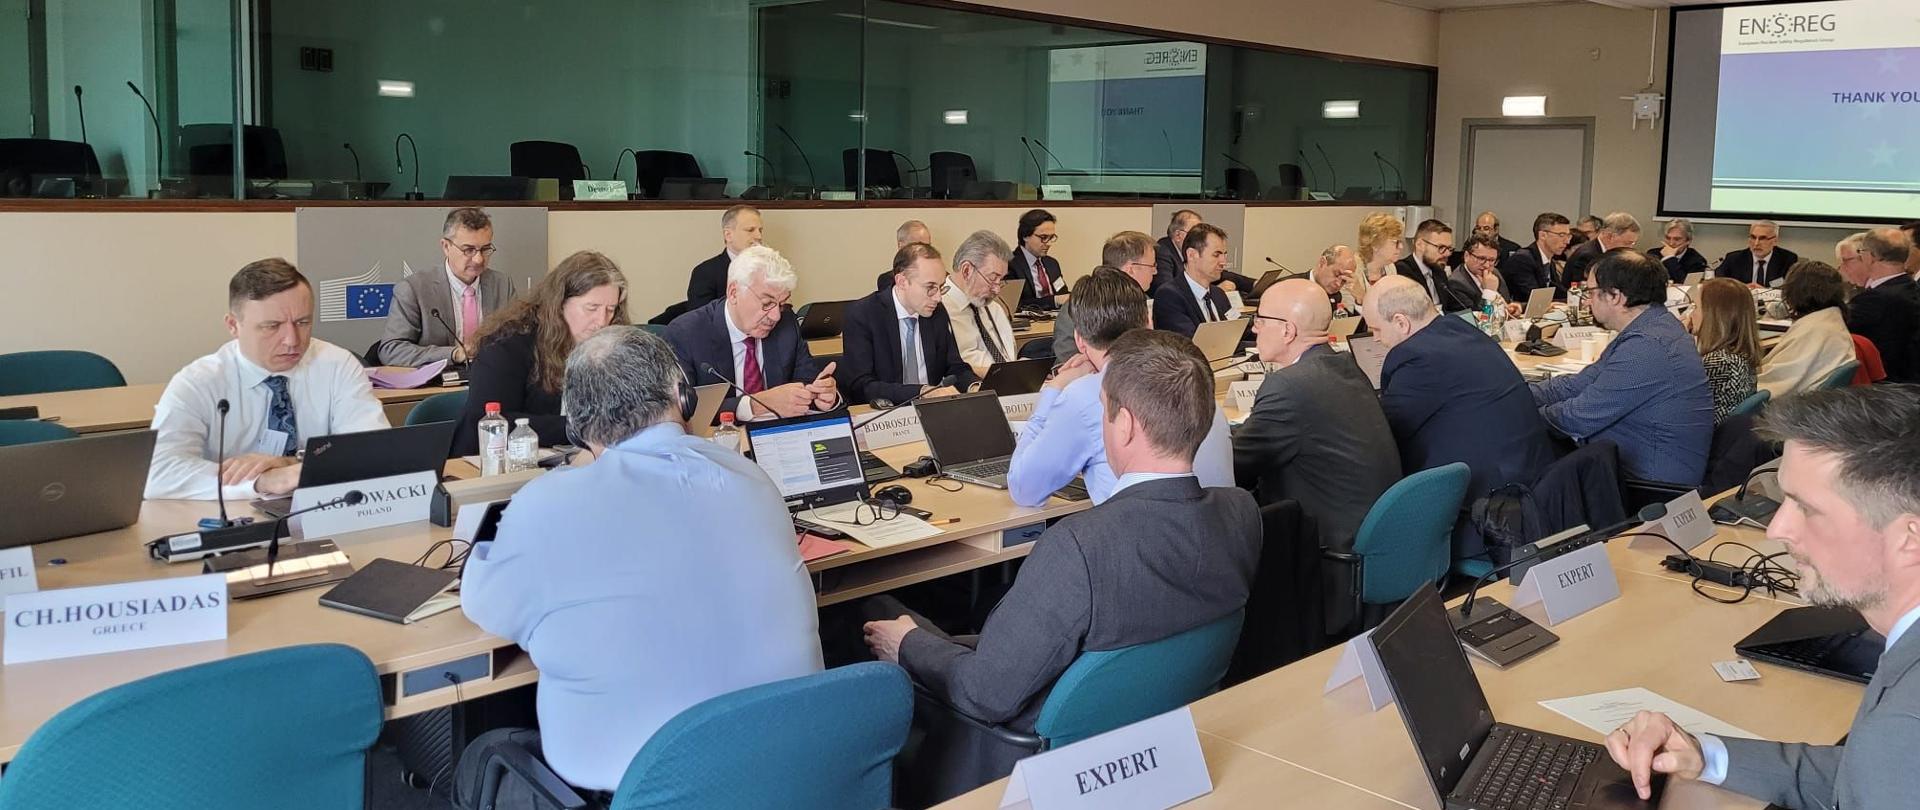 President of the National Atomic Energy Agency, Andrzej Głowacki during the plenary meeting of the European Nuclear Safety Regulatory Group (ENSREG)